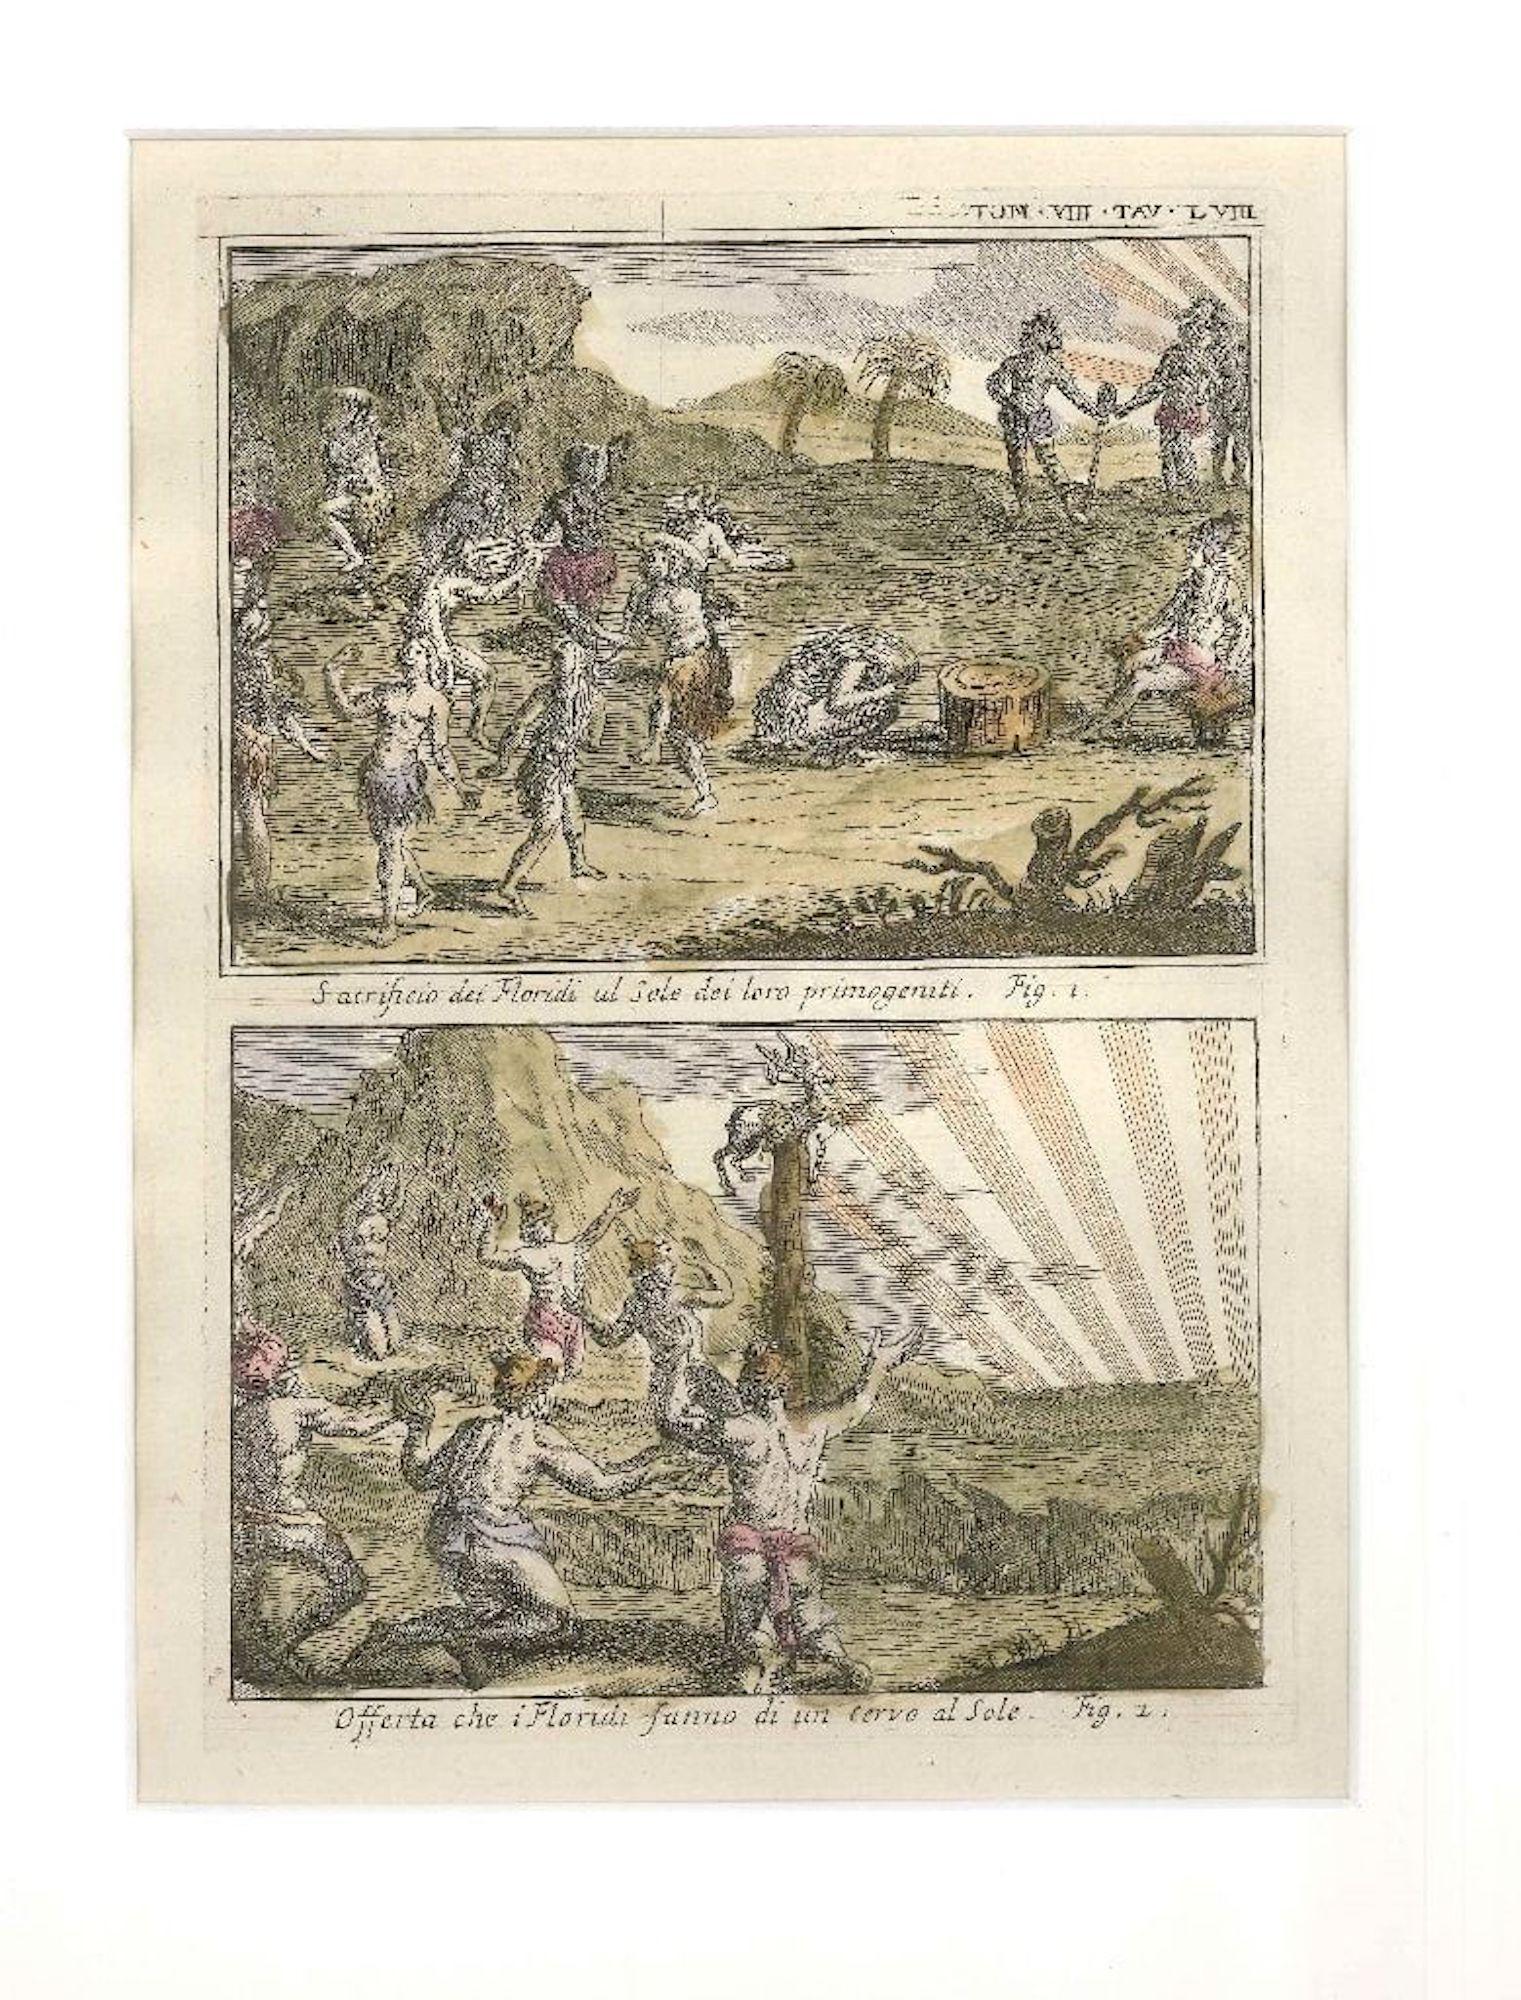 Gianfrancesco Pivati Figurative Print - Offers and Sacrifices to the Sun among the Floridians - by G. Pivati - 1746-1751